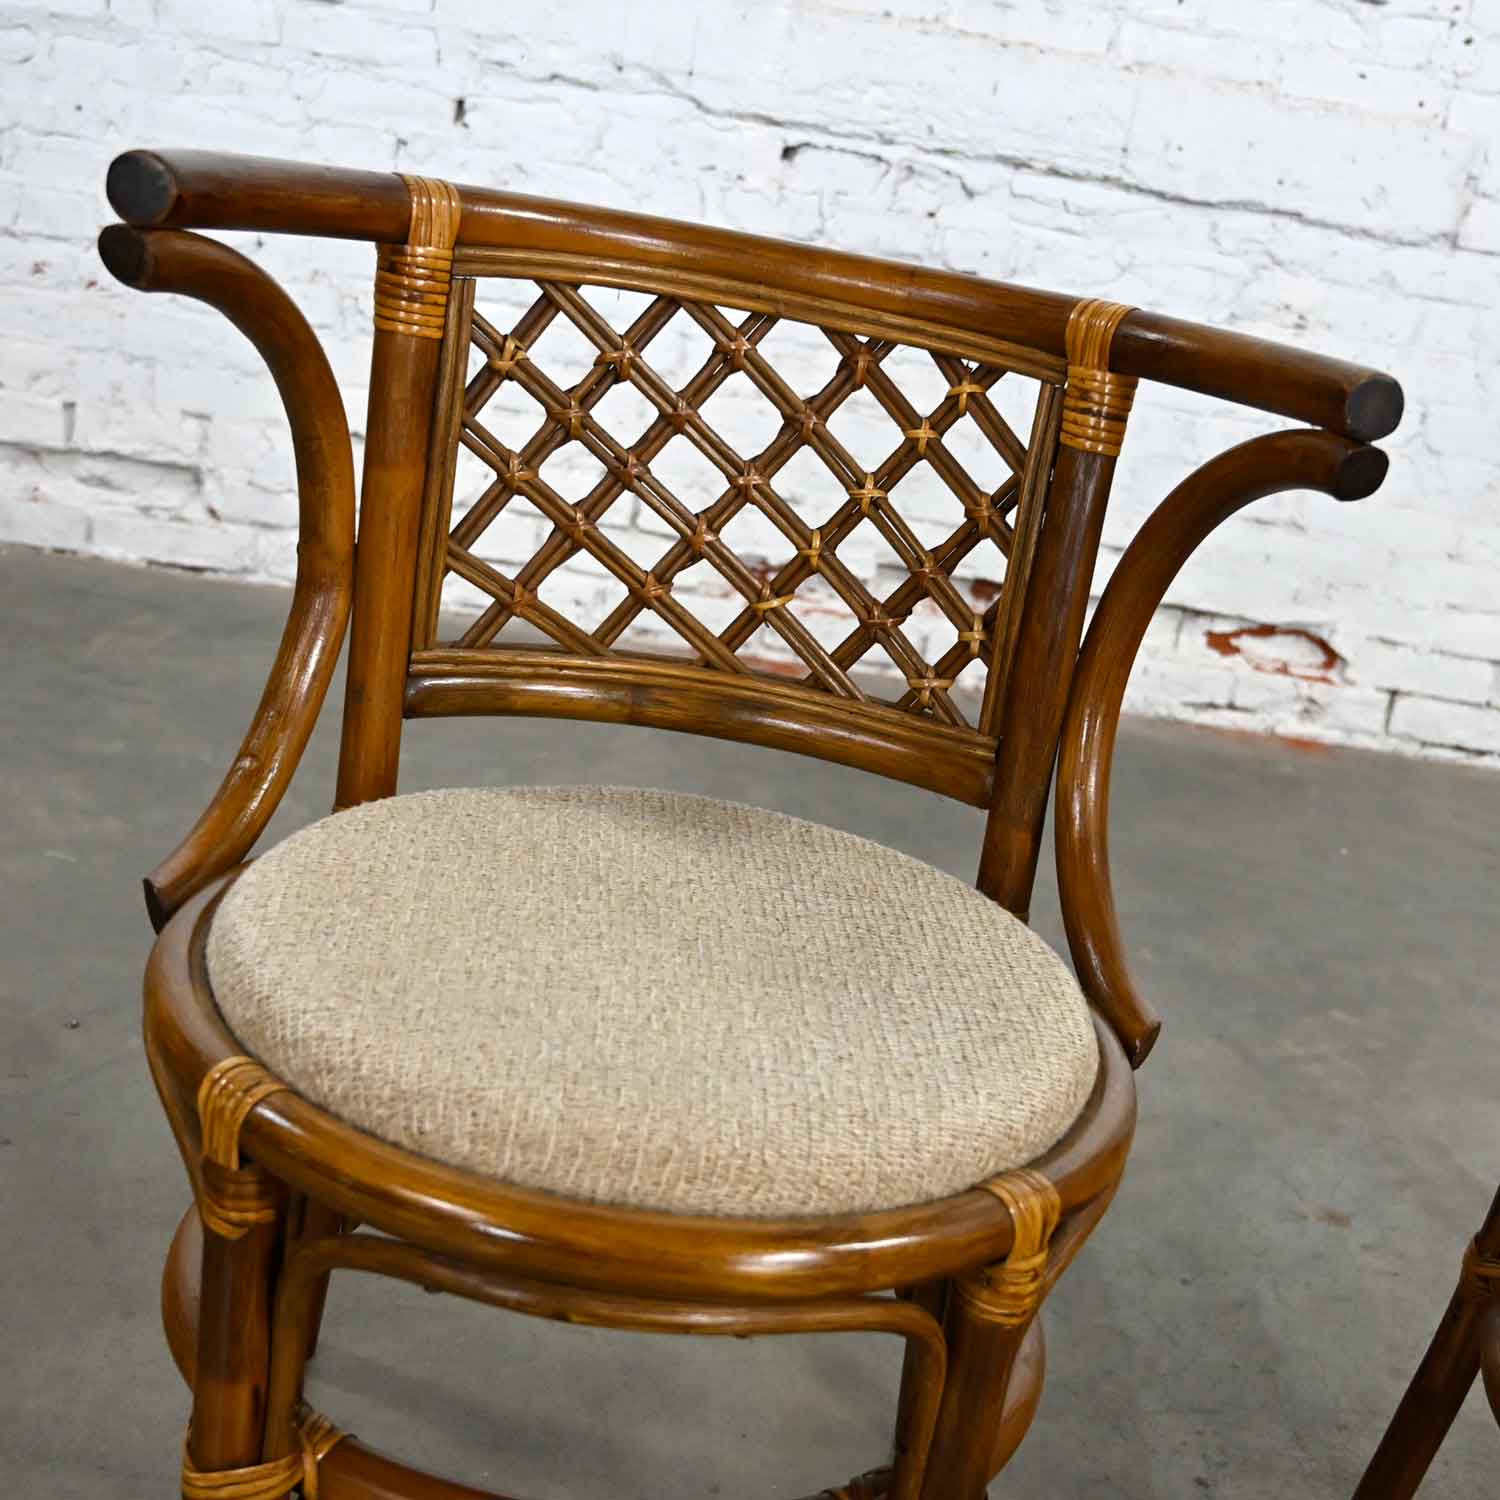 Vintage Rattan & Cane Pair of Side Chairs Woven Diamond Yoke Back Off-White Tweed Fabric